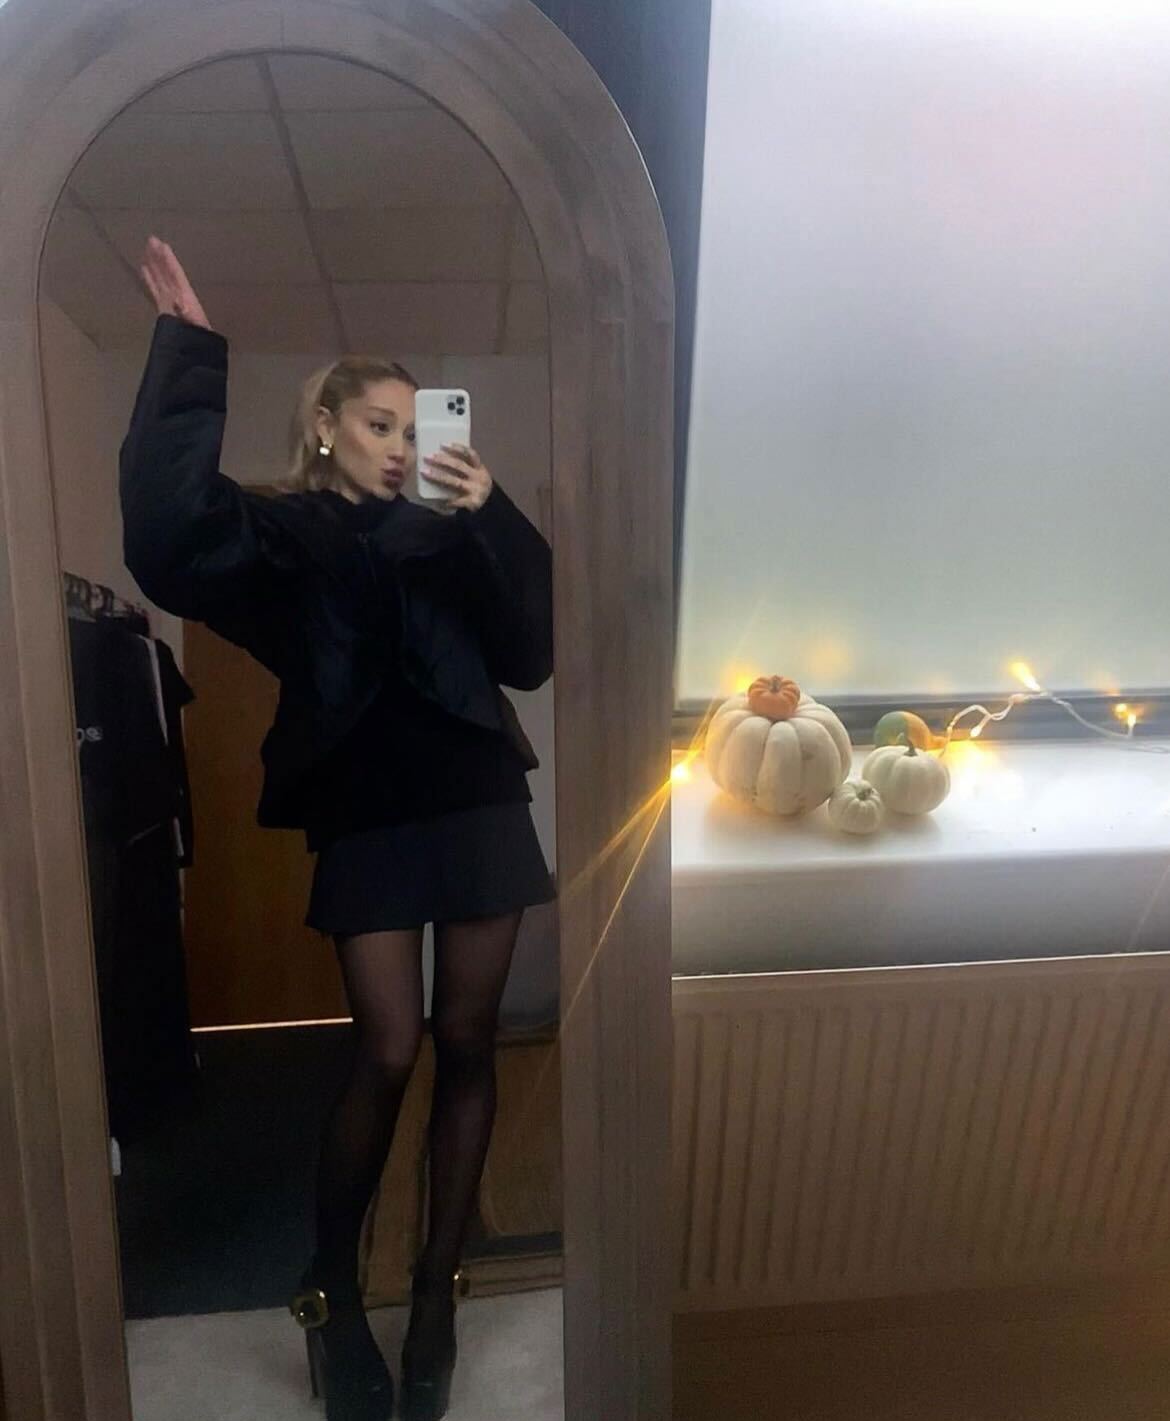 Ariana Grande has been sparking concerns after appearing to look thinner in her Instagram posts and public appearances.